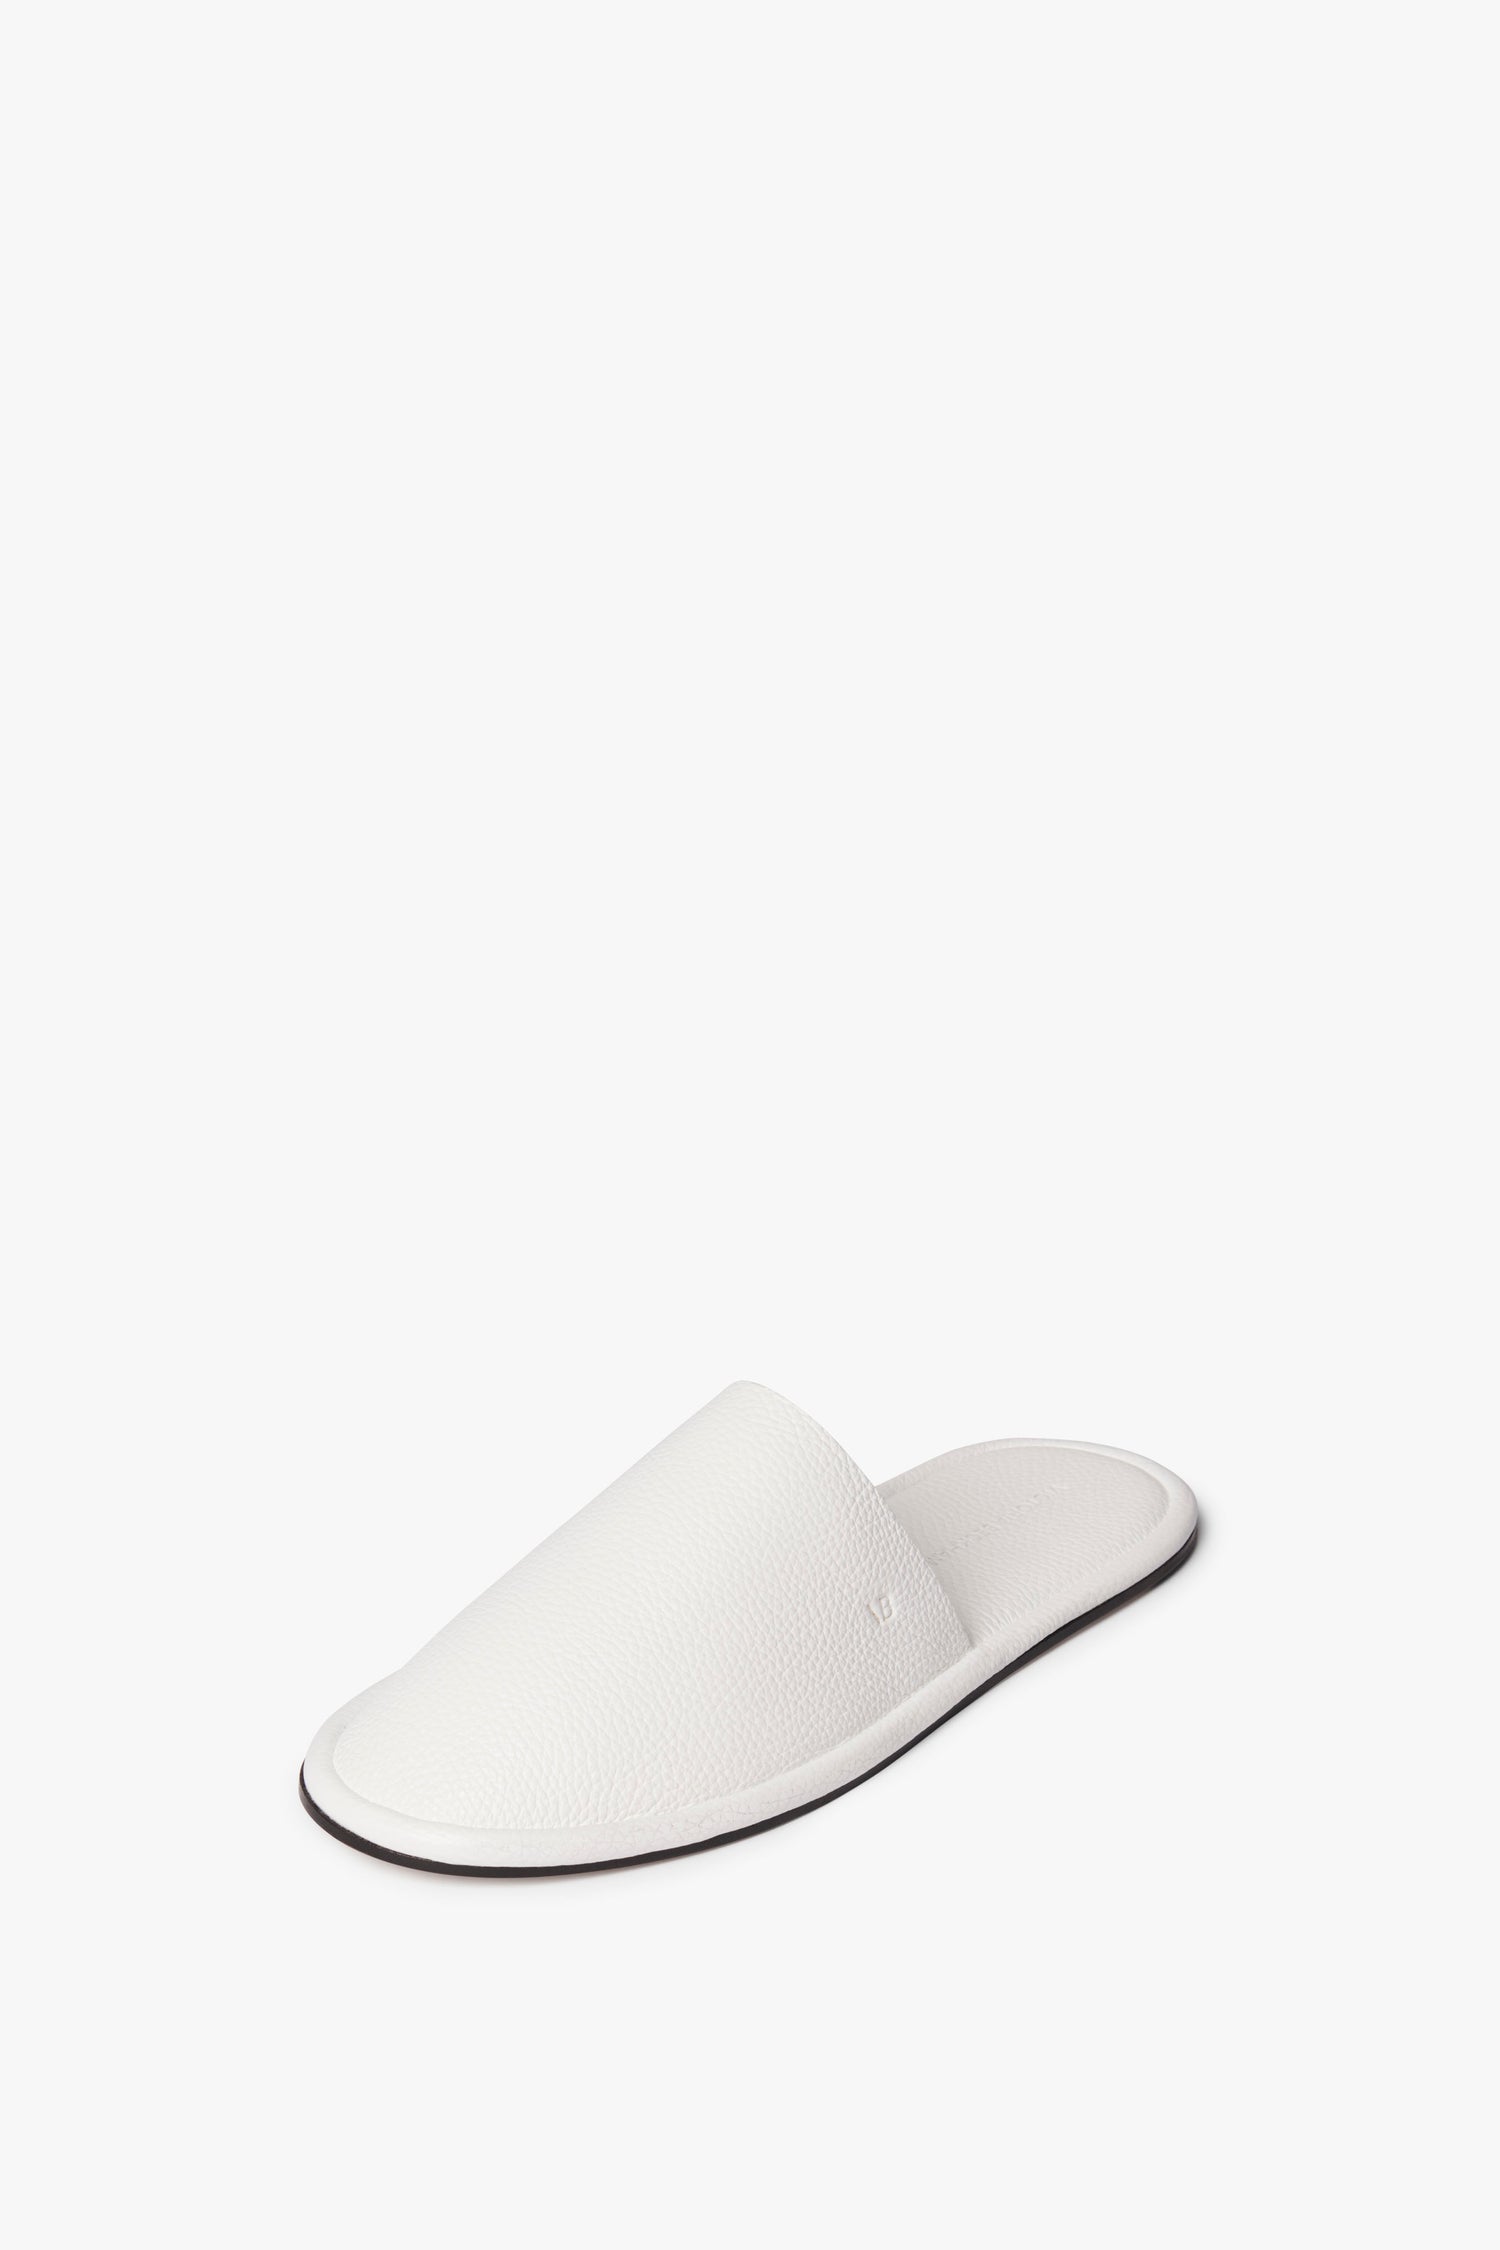 A single white Amelia Leather Mule in White by Victoria Beckham with an open-back design and a flat black sole, crafted from embossed leather, displayed on a white background.